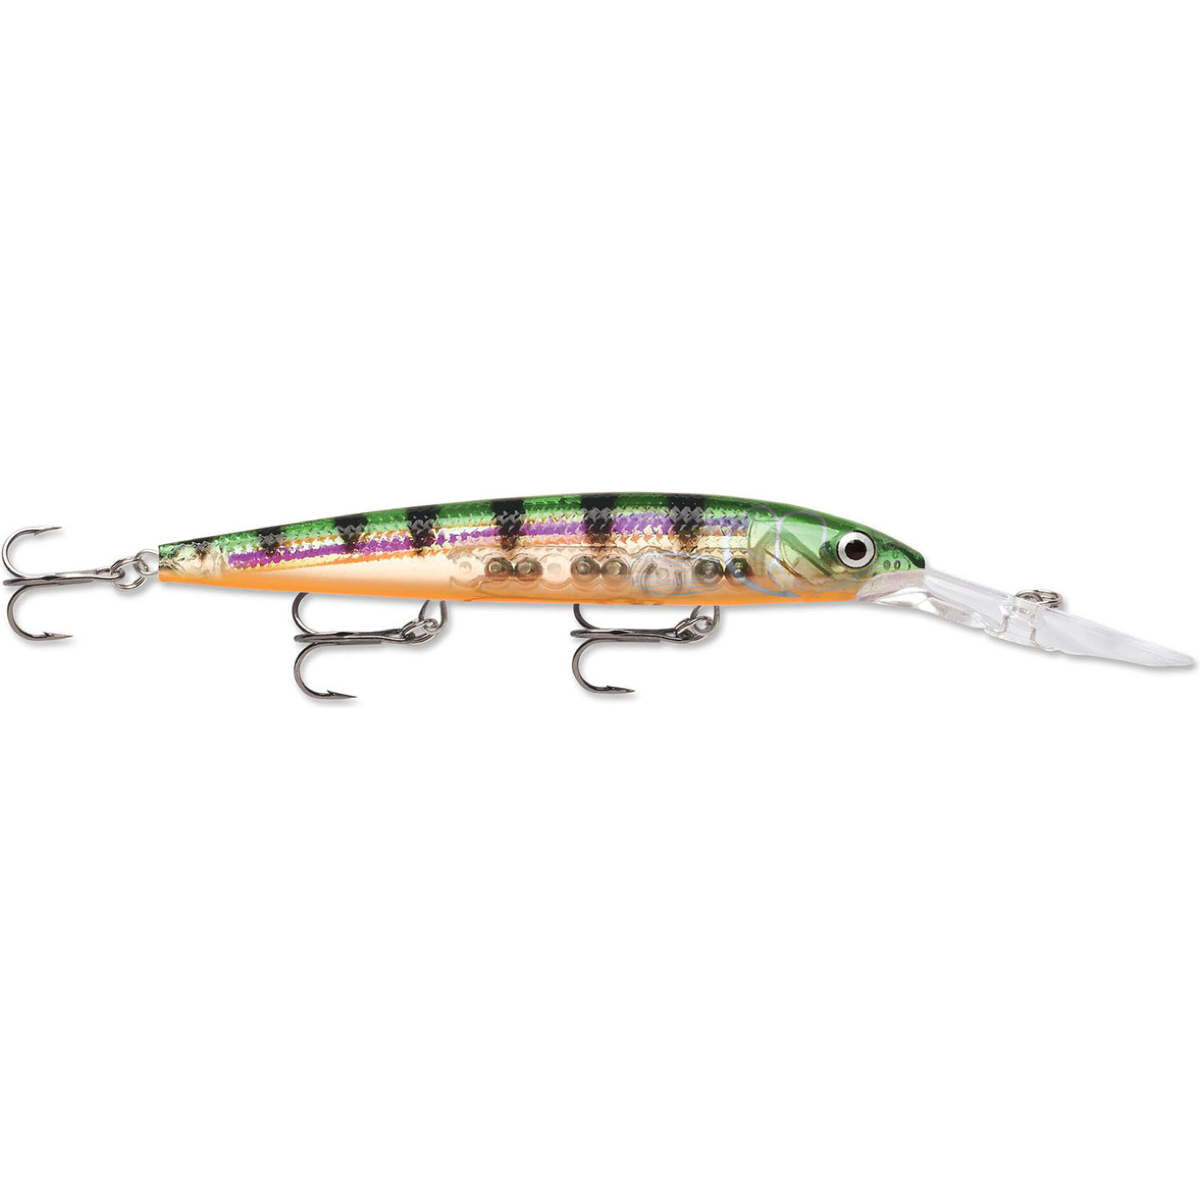 Photo of Rapala Down Deep Husky Jerk for sale at United Tackle Shops.